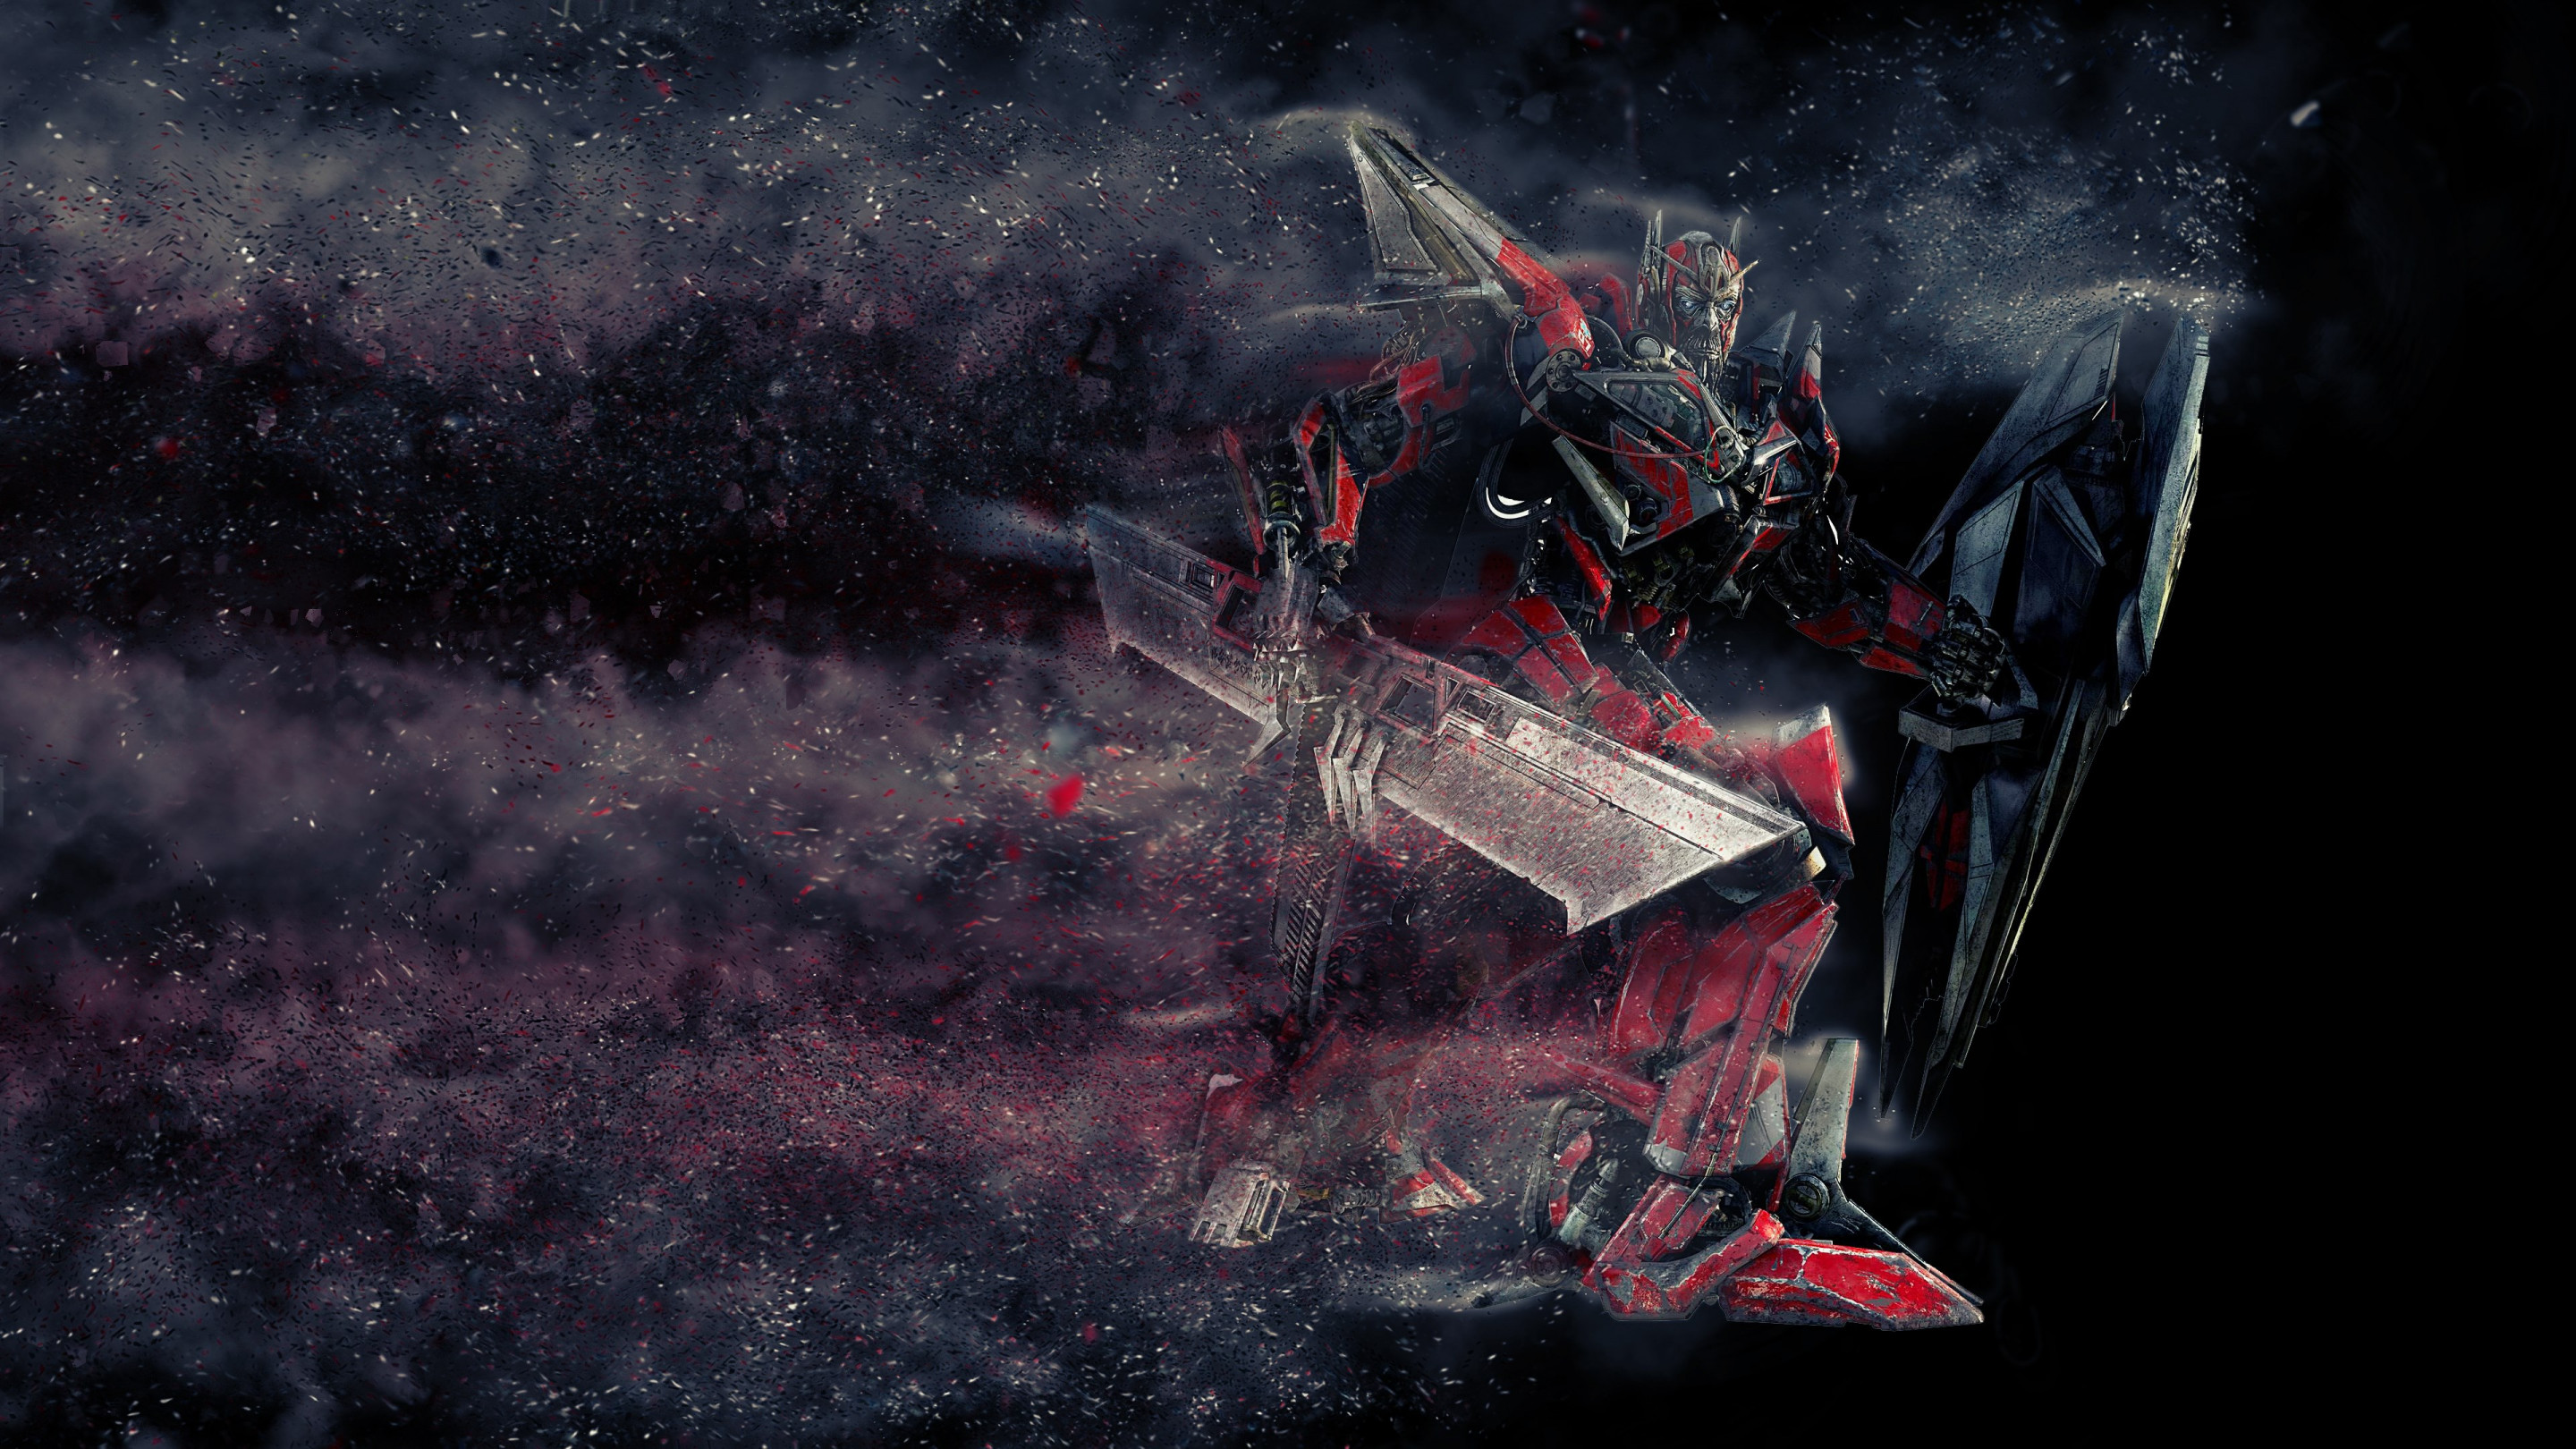 Sentinel Prime from Transformers wallpaper 2880x1620